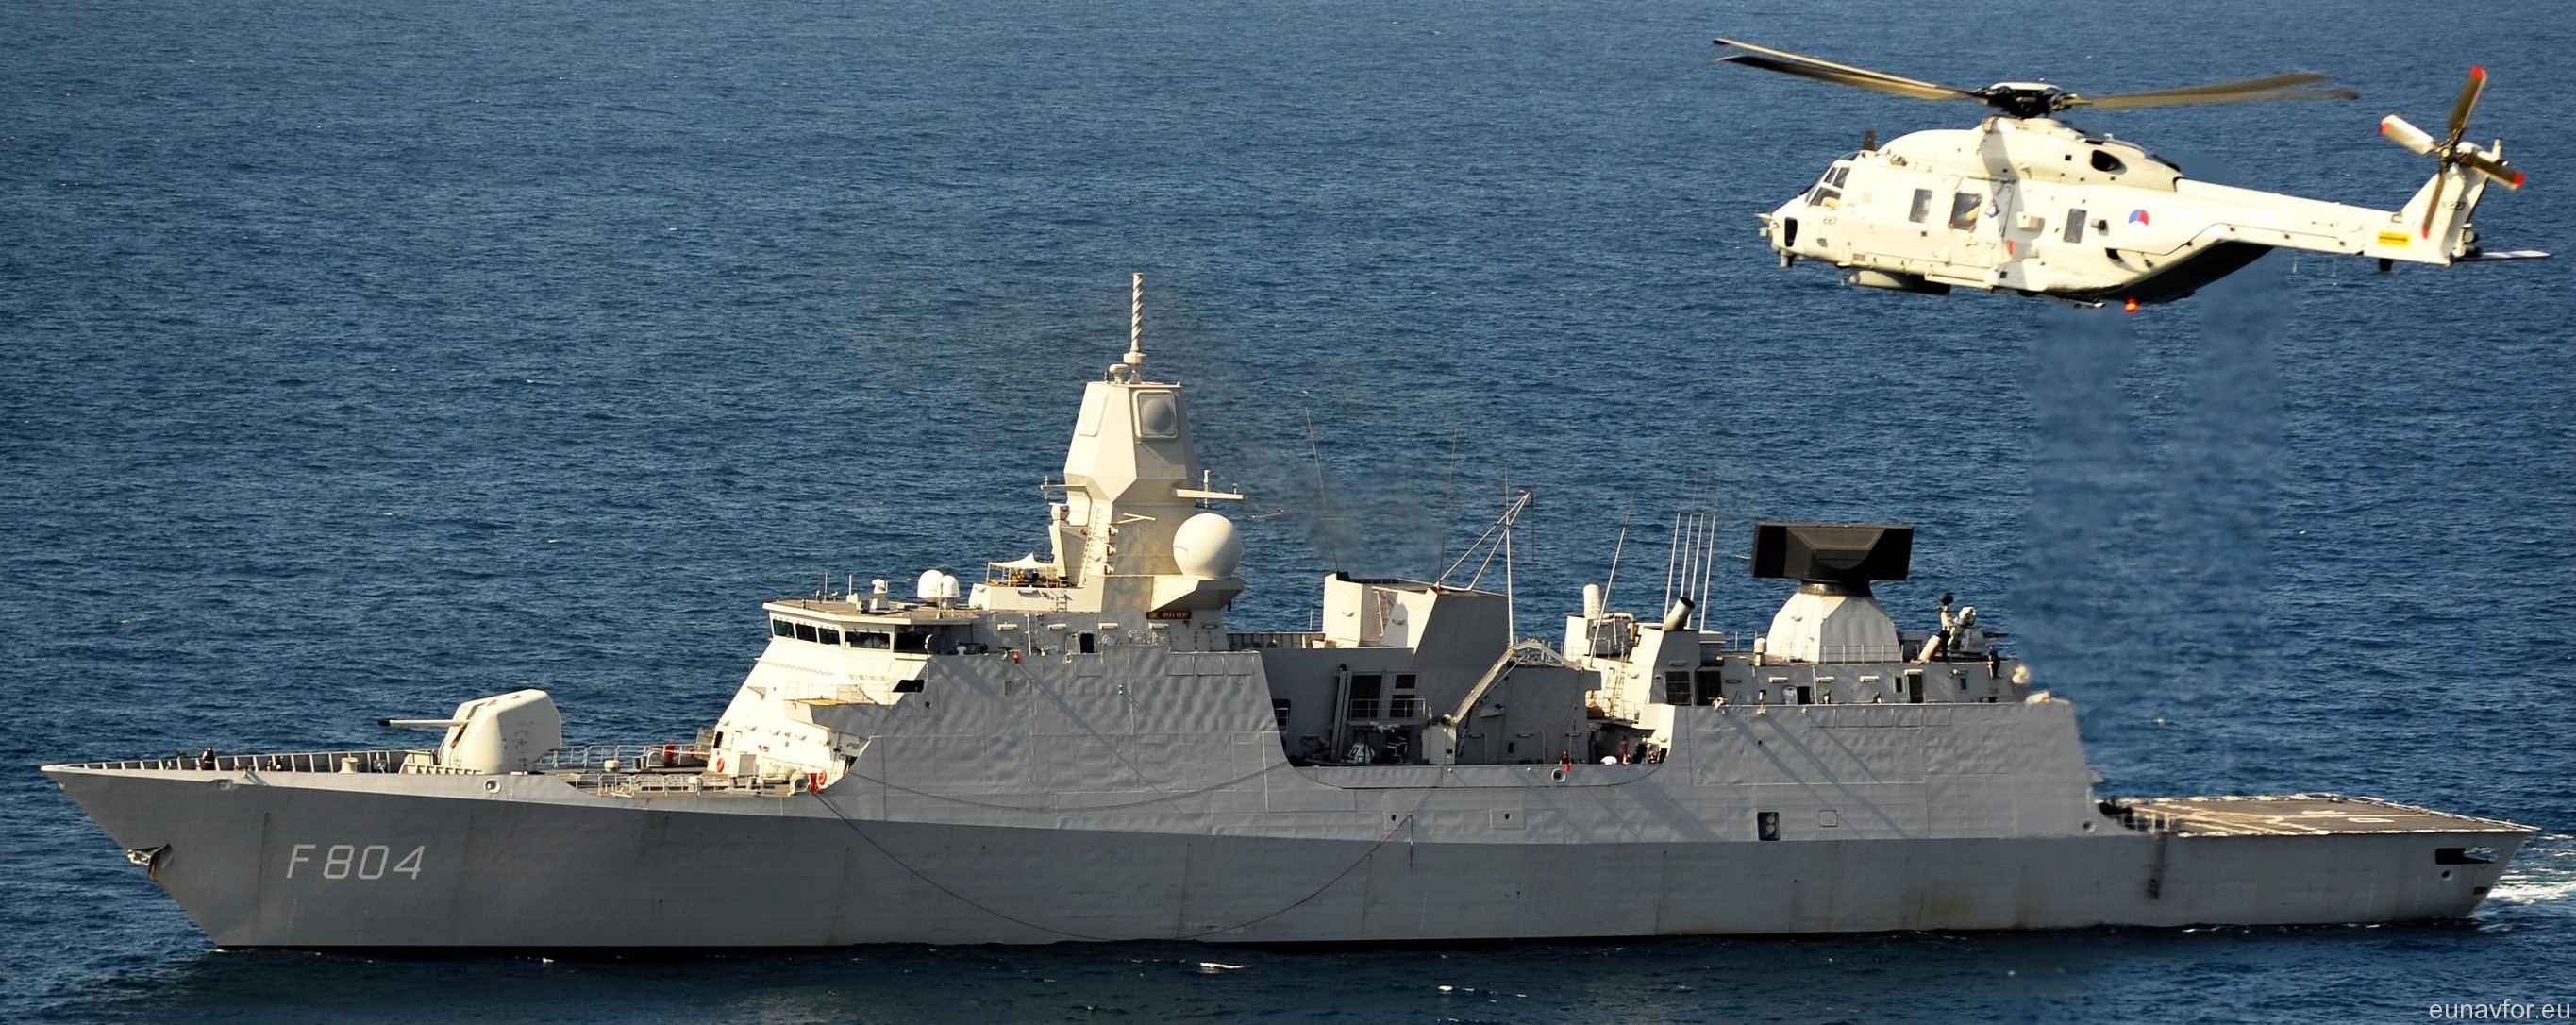 f-804 hnlms de ruyter guided missile frigate ffg lcf royal netherlands navy 23 nh90 helicopter